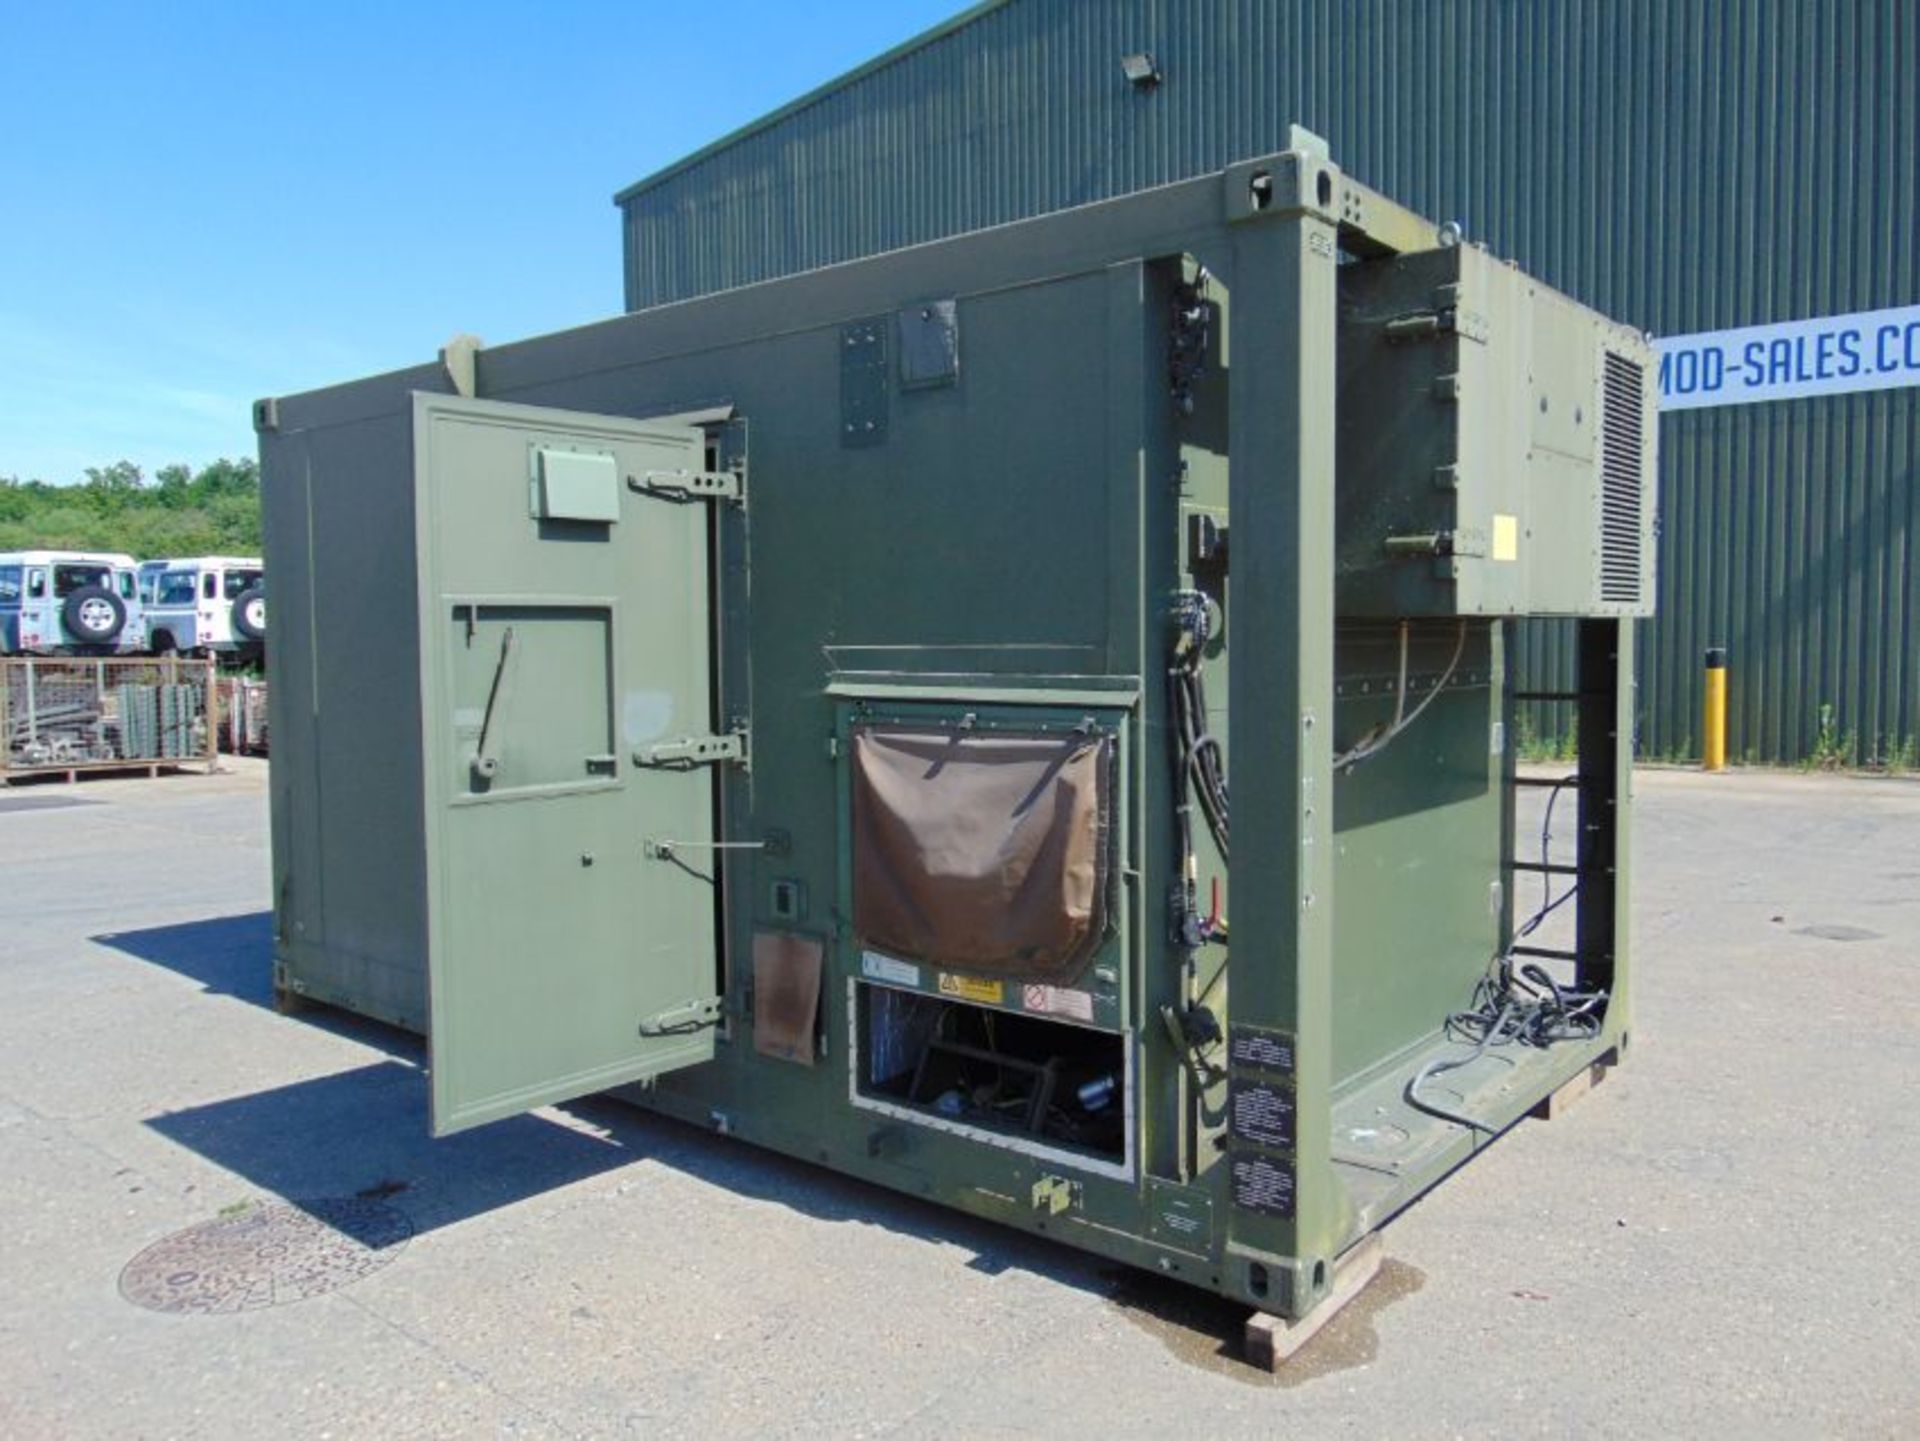 Rapidly Deployable Containerised Insys Ltd Integrated Biological Detection/Decontamination System - Image 10 of 33